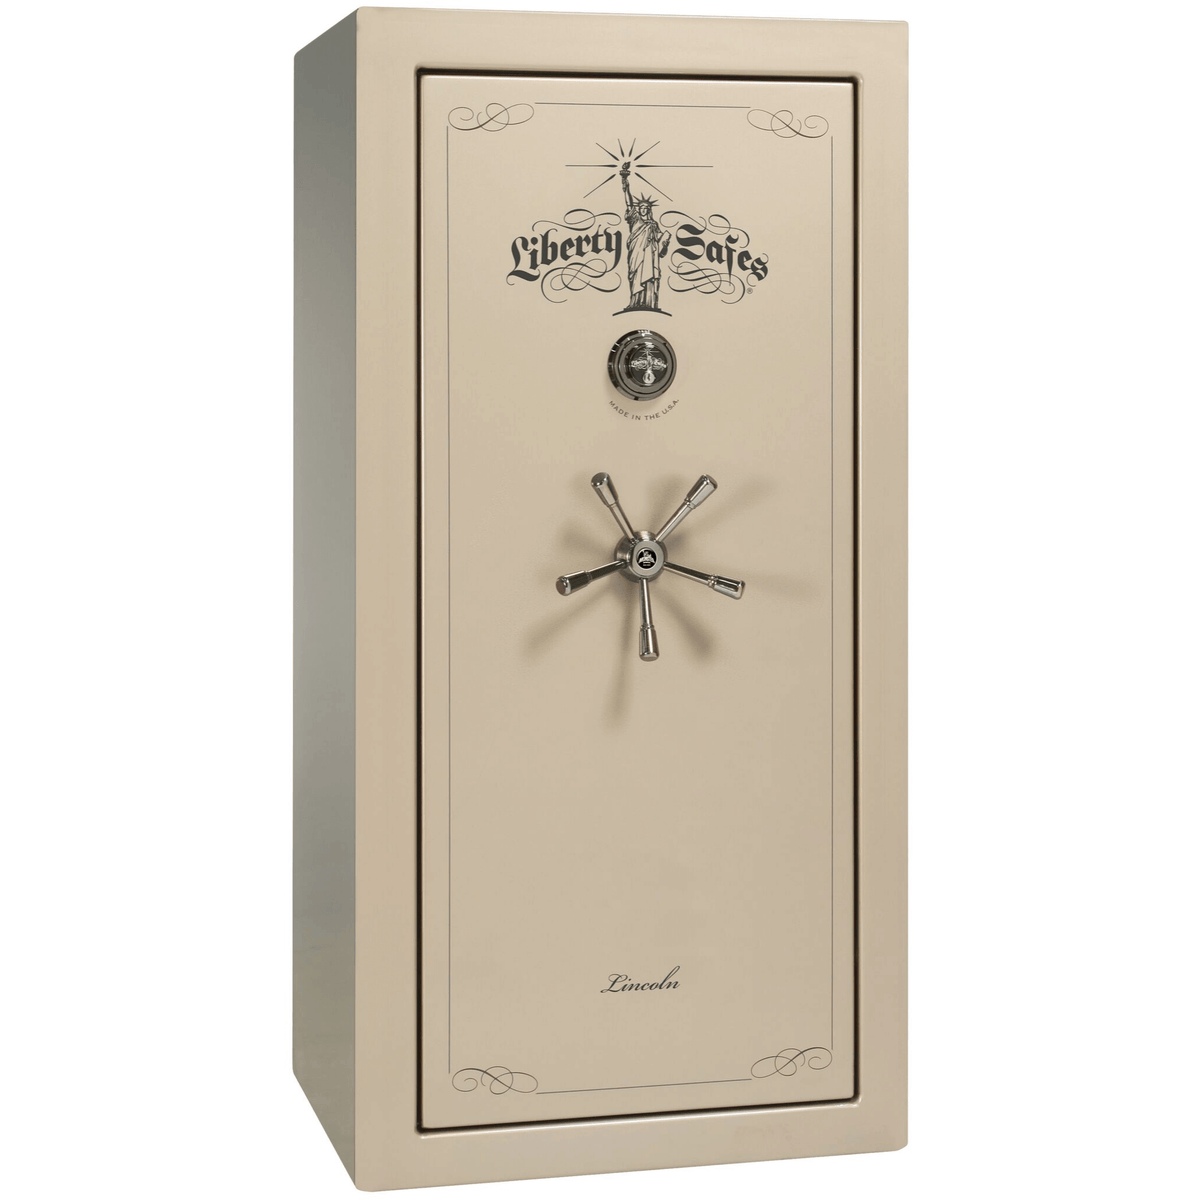 Liberty Lincoln 25 Safe in Champagne Gloss with Black Chrome Mechanical Lock.